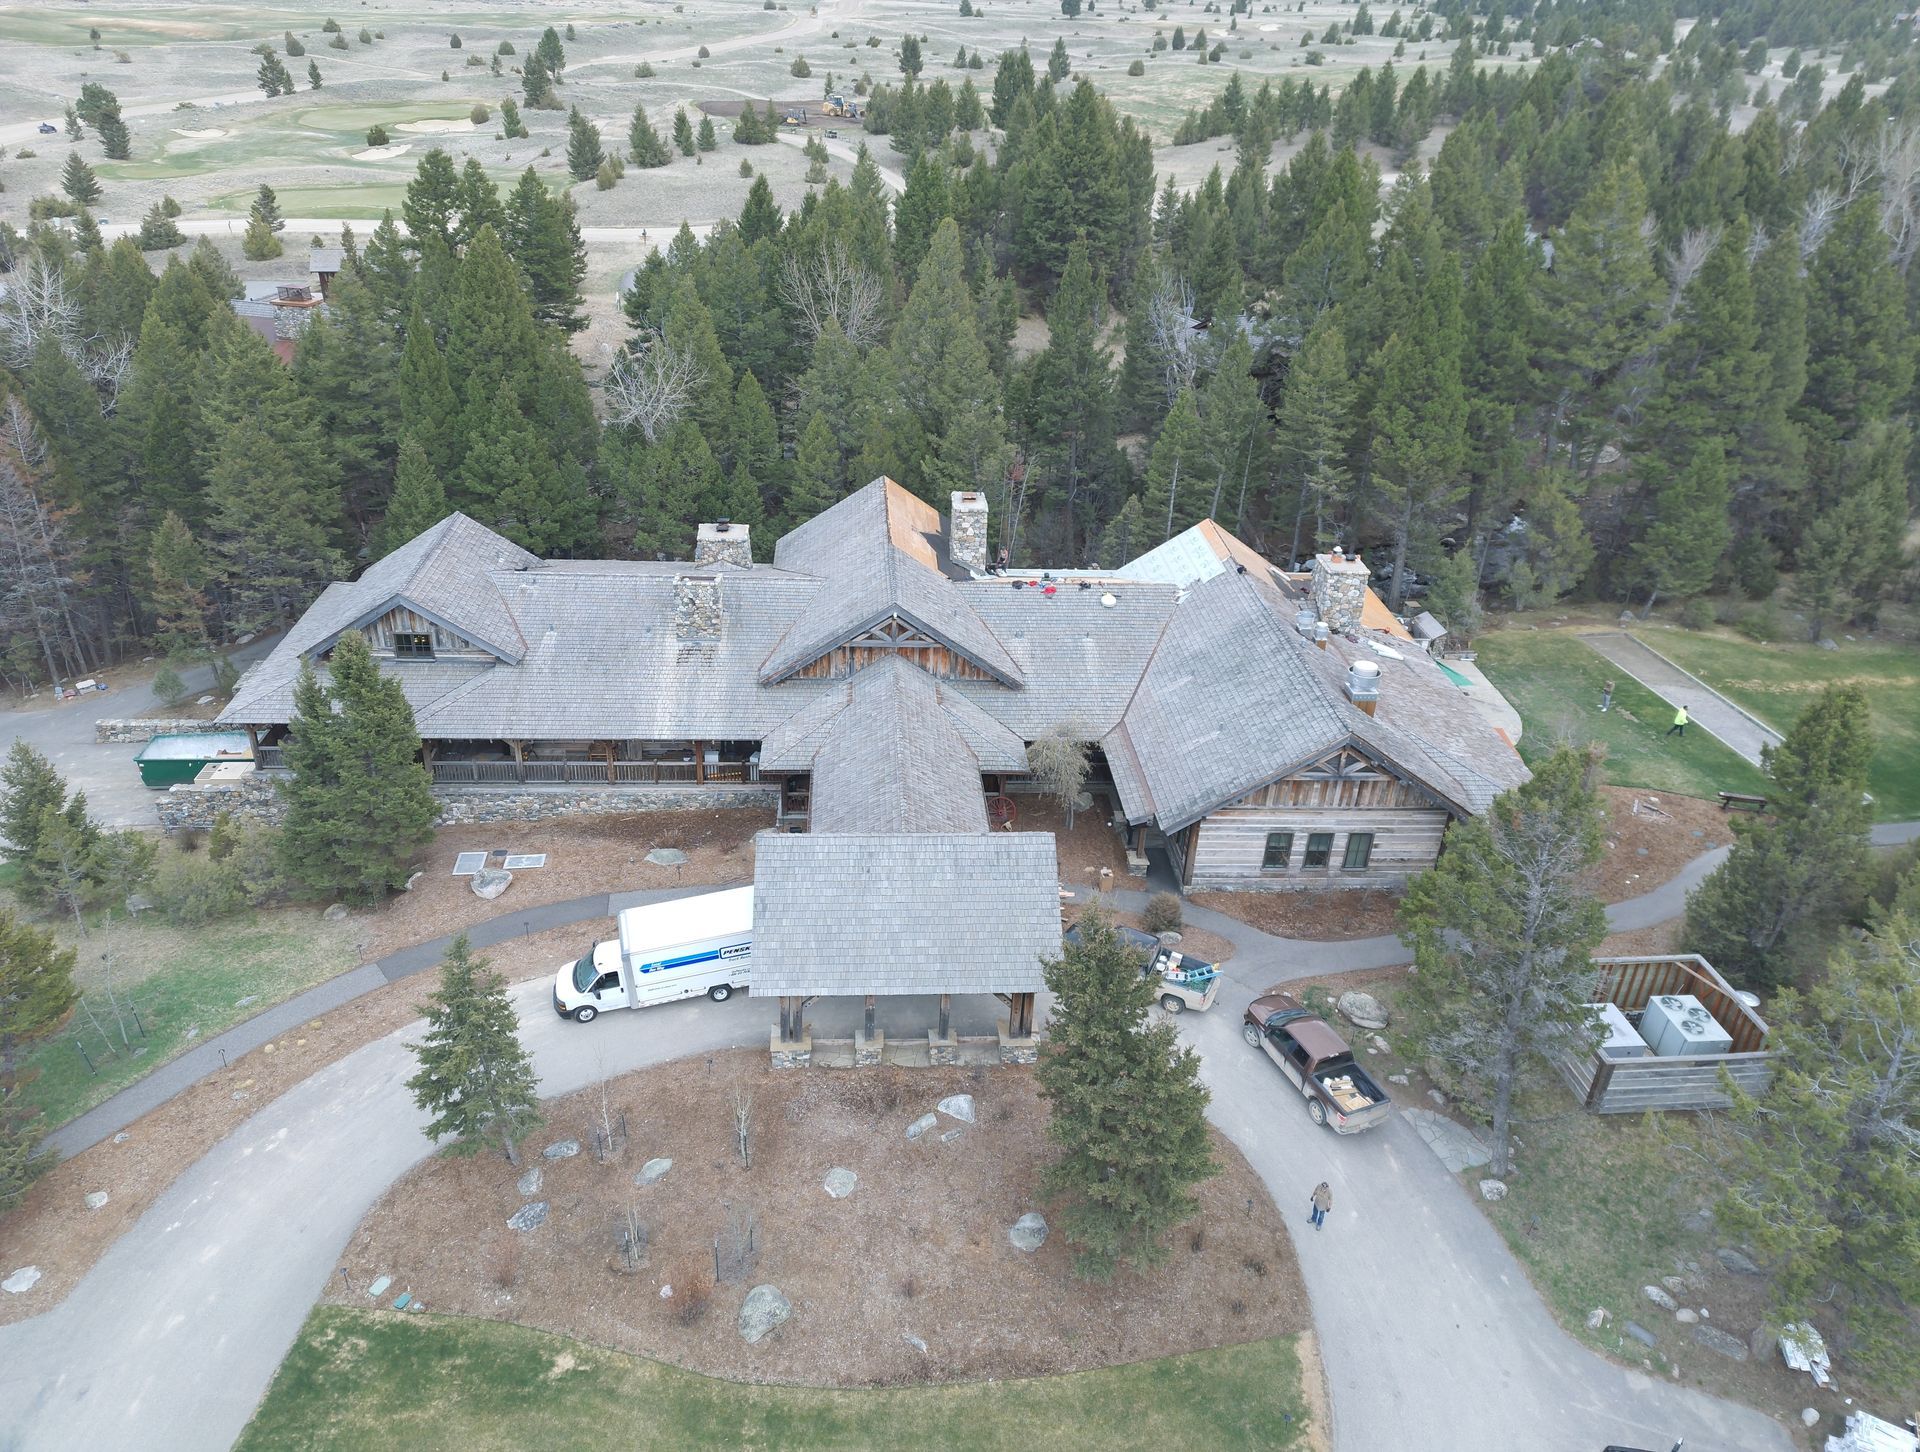 Ellingson Roofing LLC, Roofing MT, Custom Roofing Montana, Montana Roofing Solutions, Montana Roofers, Commercial Roof Replacement